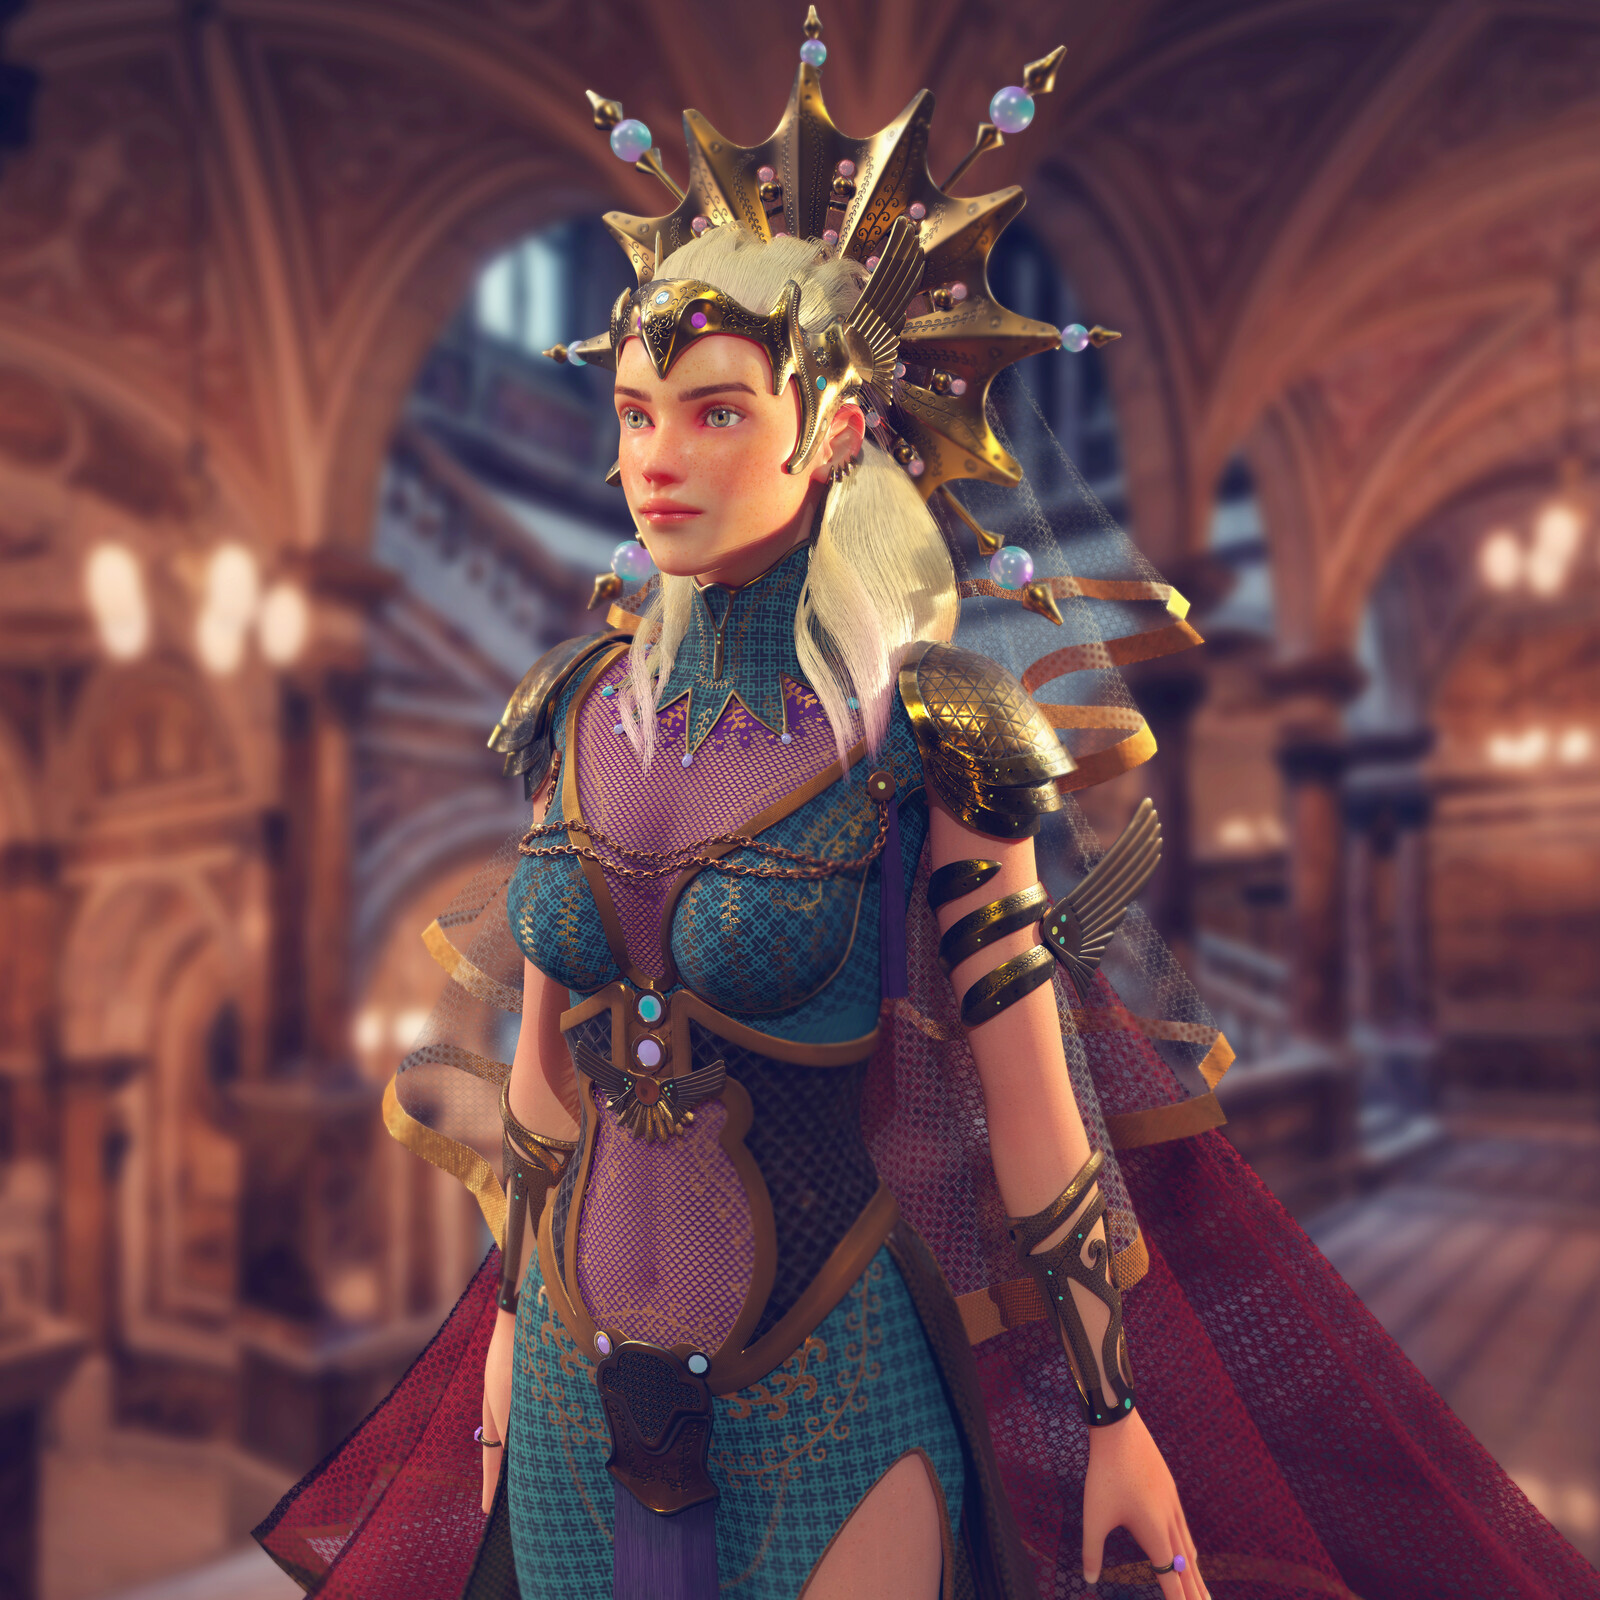 The Queen 3D CG Character. I modeled in Maya and Zbrush. textured in substance painter.